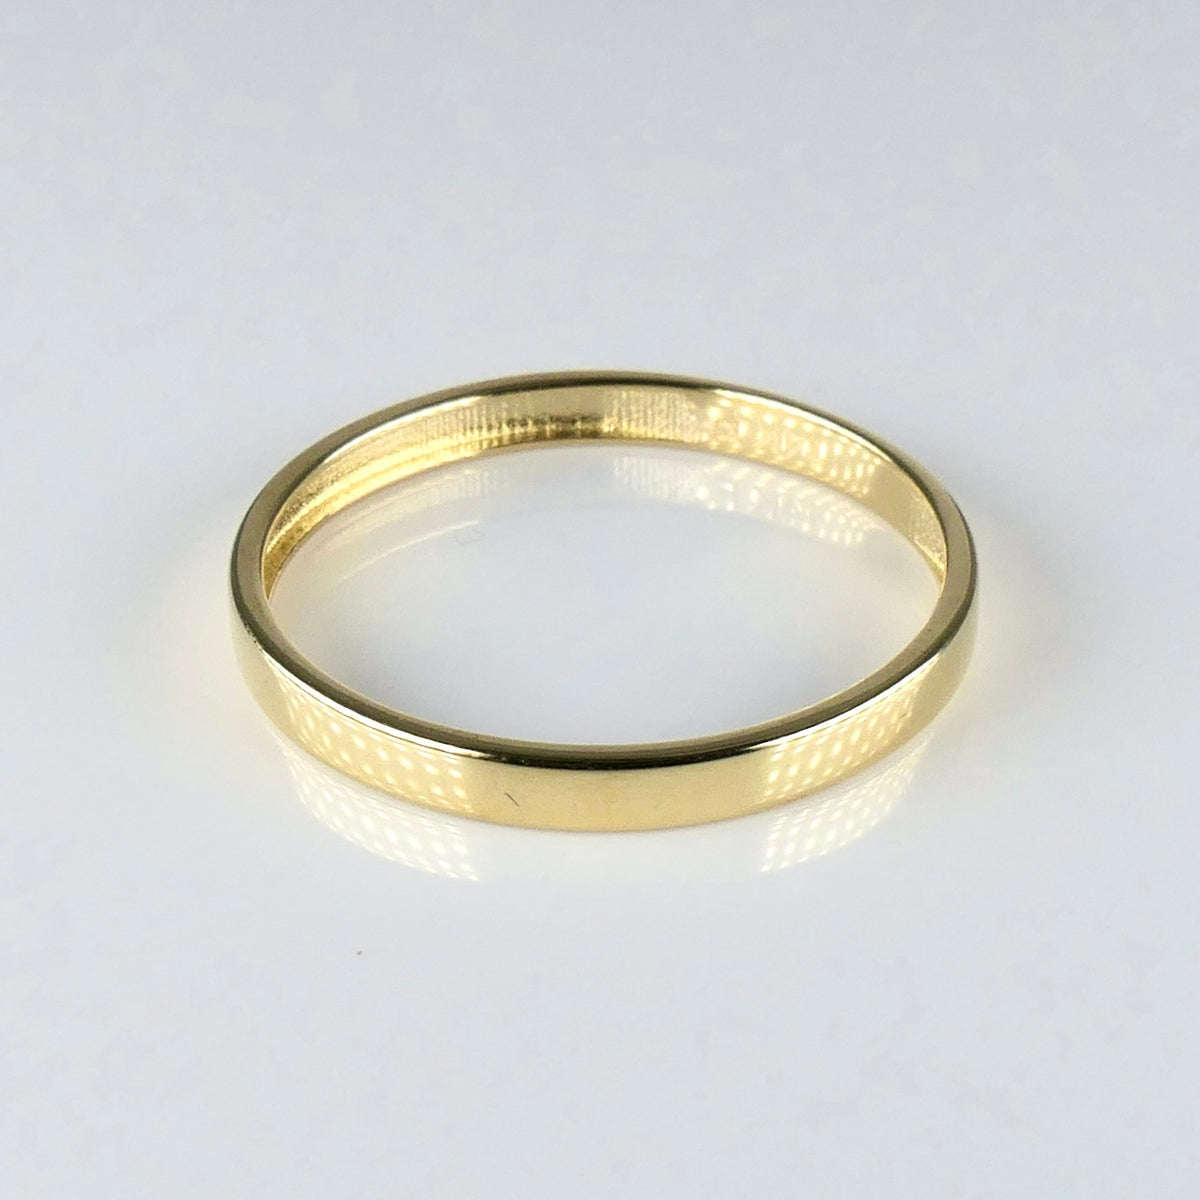 14K Yellow Gold 2mm Polished Flat Band Stackable Ring